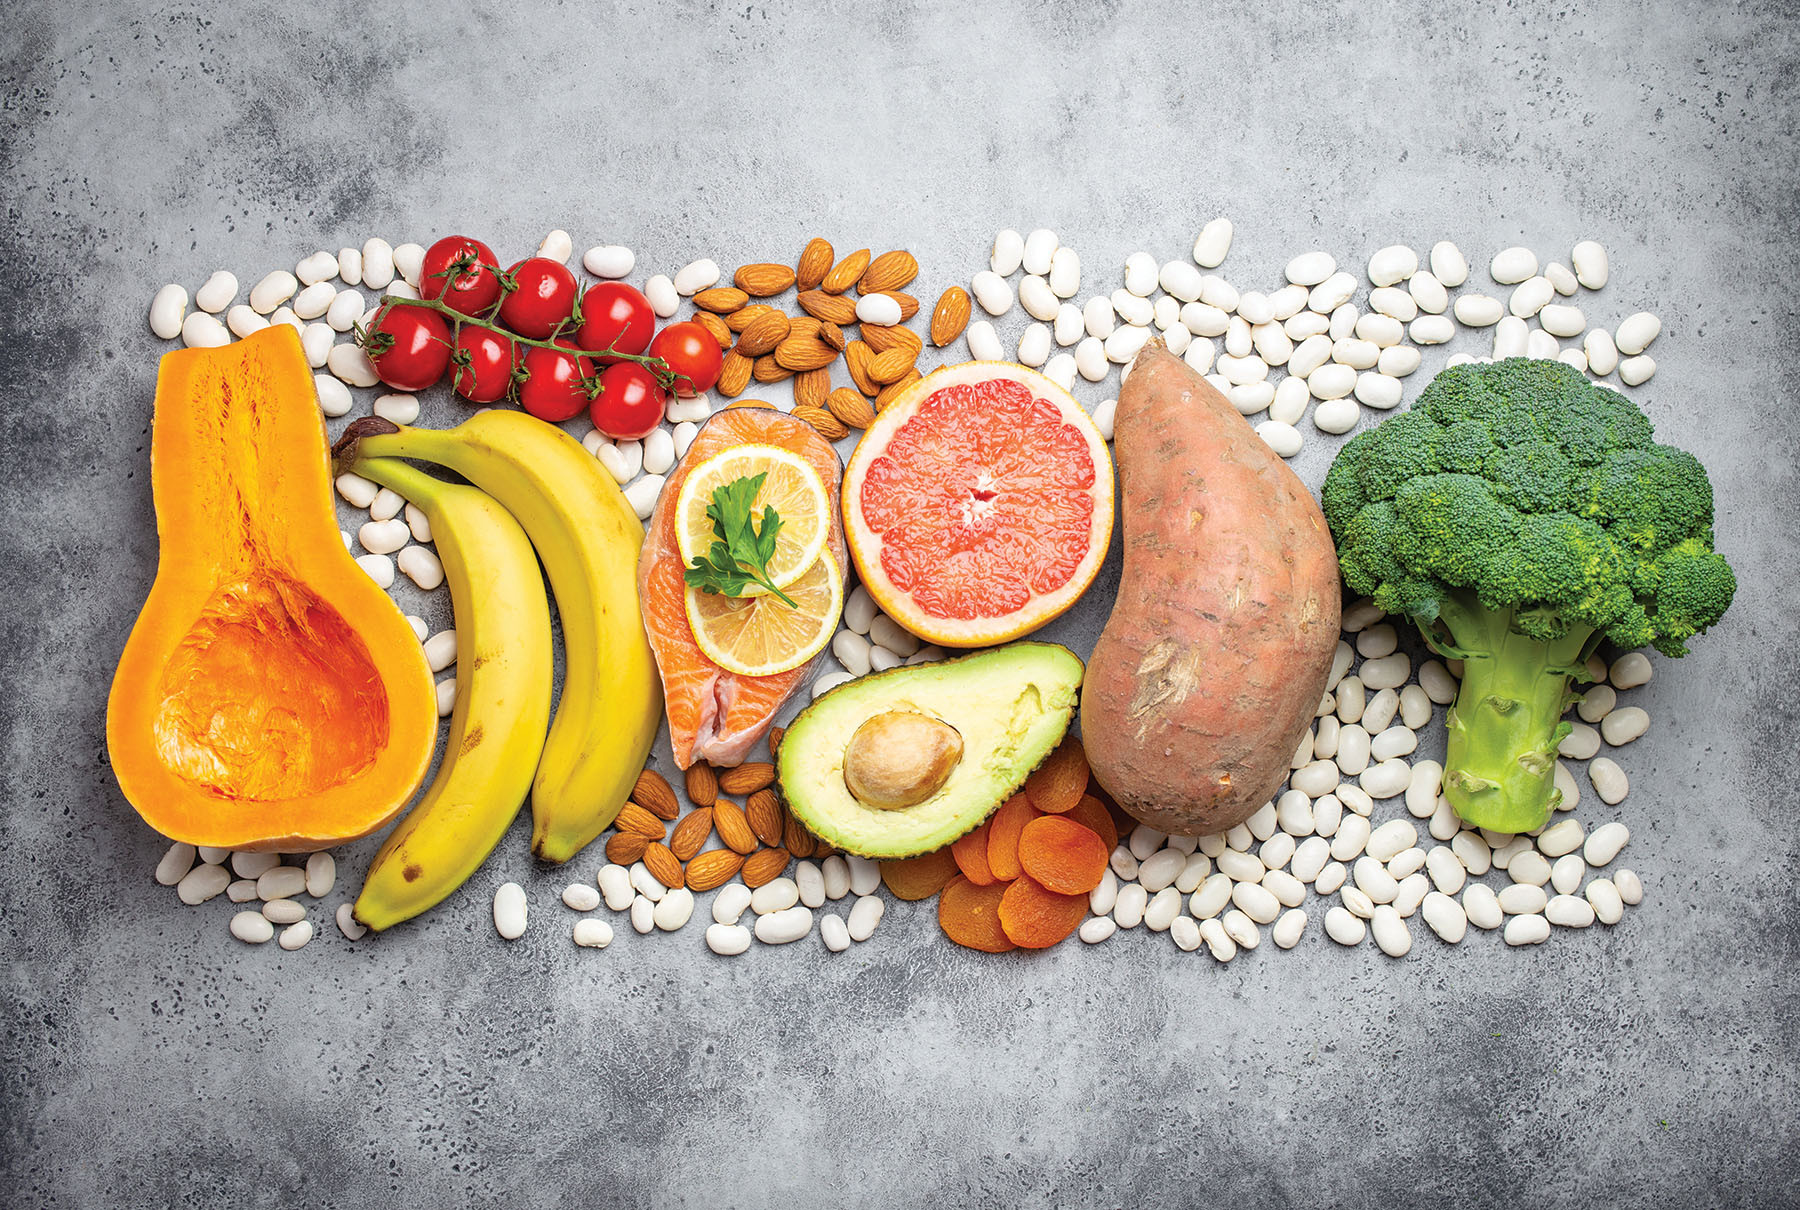 photo of an assortment of foods that are good sources of potassium, including swweet potato, bananas, white beans, grape tomatoes, broccoli, avocado, and salmon